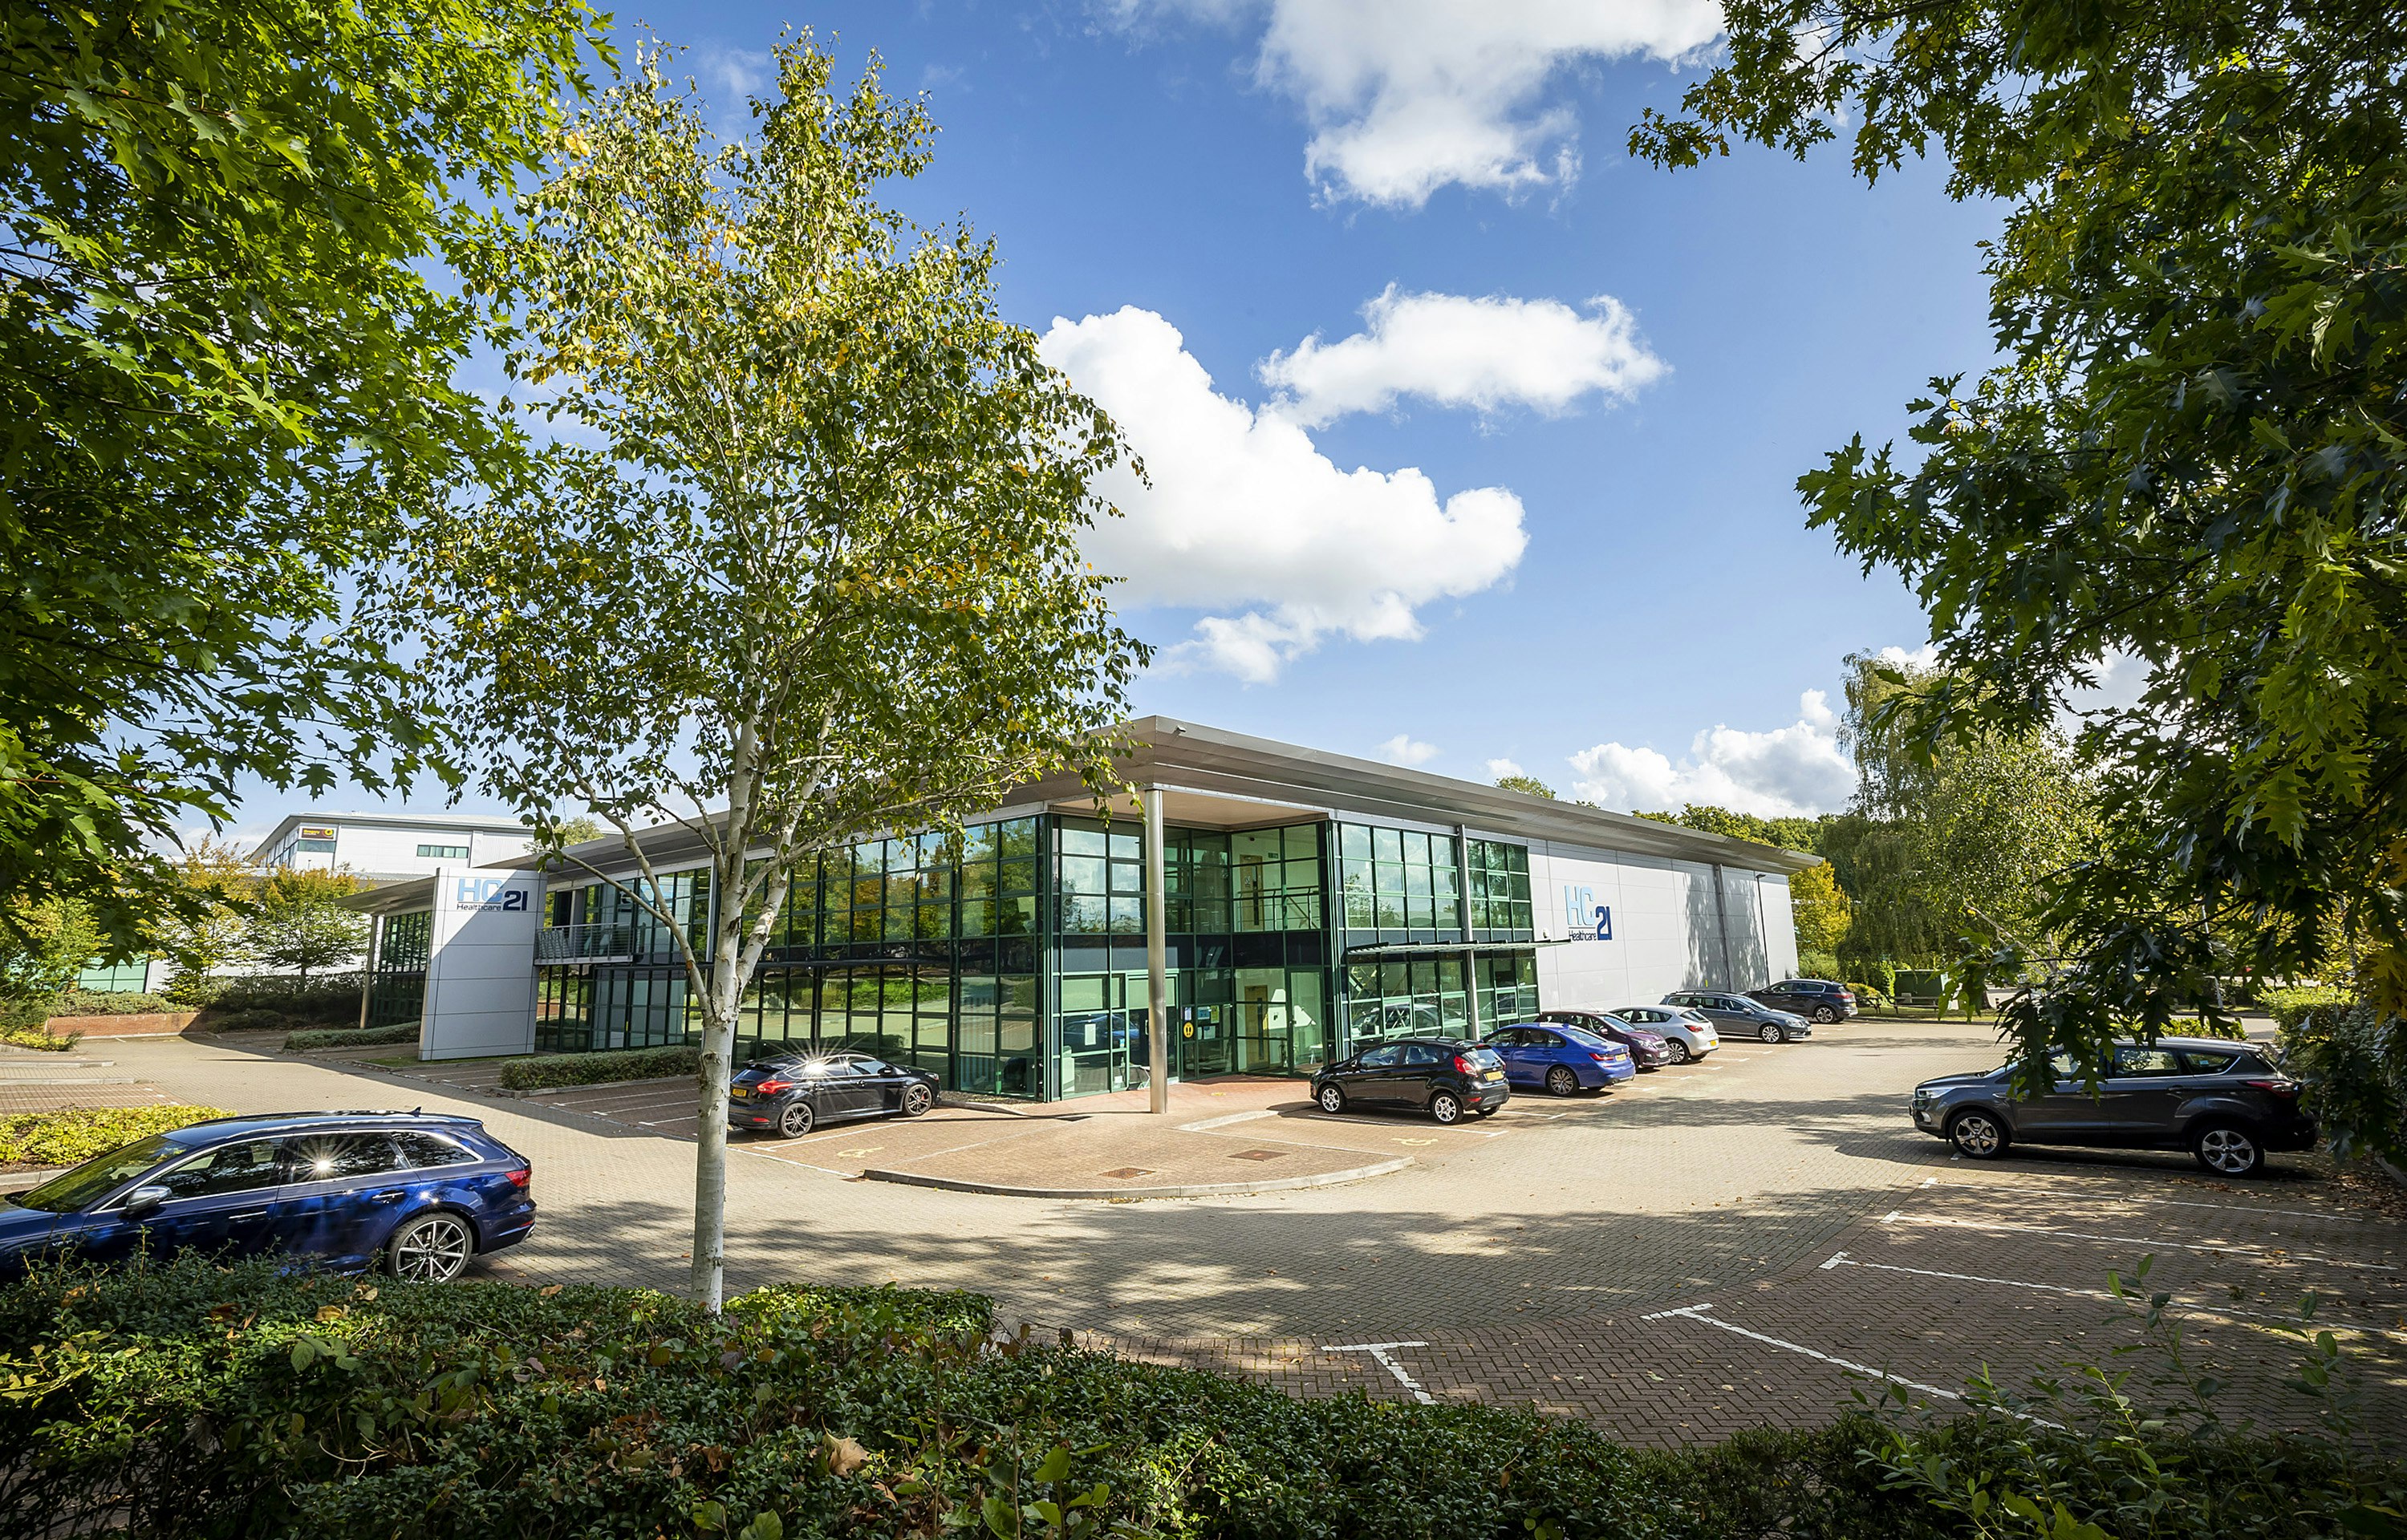 A glass and panelled two storey office building with a car park and trees in front